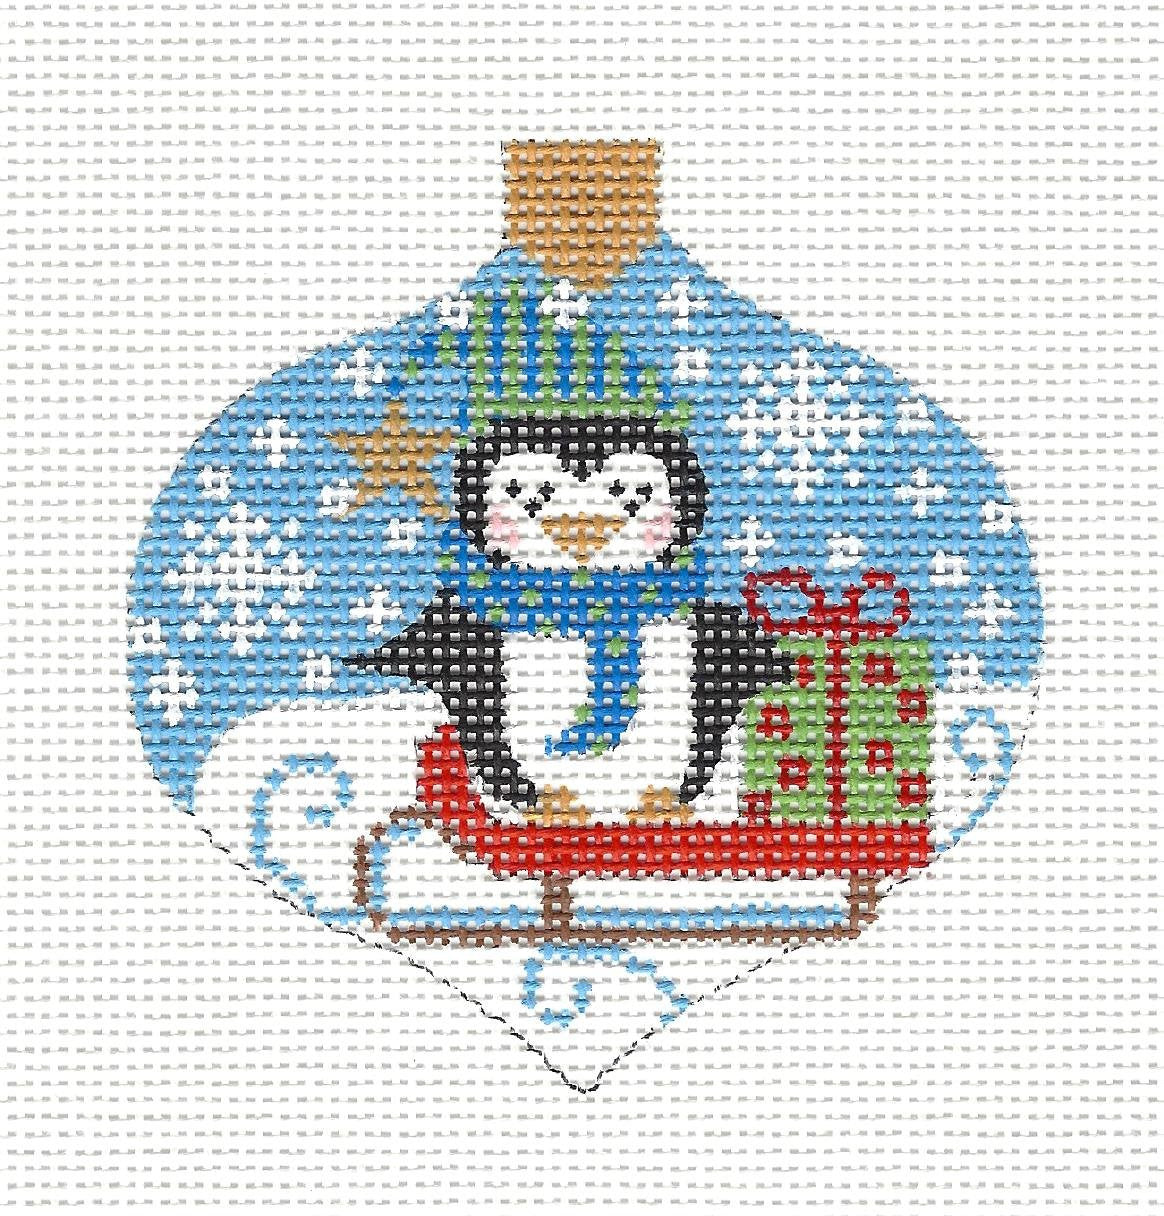 Bauble ~ Penguin on a Sled Ornament on handpainted Needlepoint Canvas by CH Designs